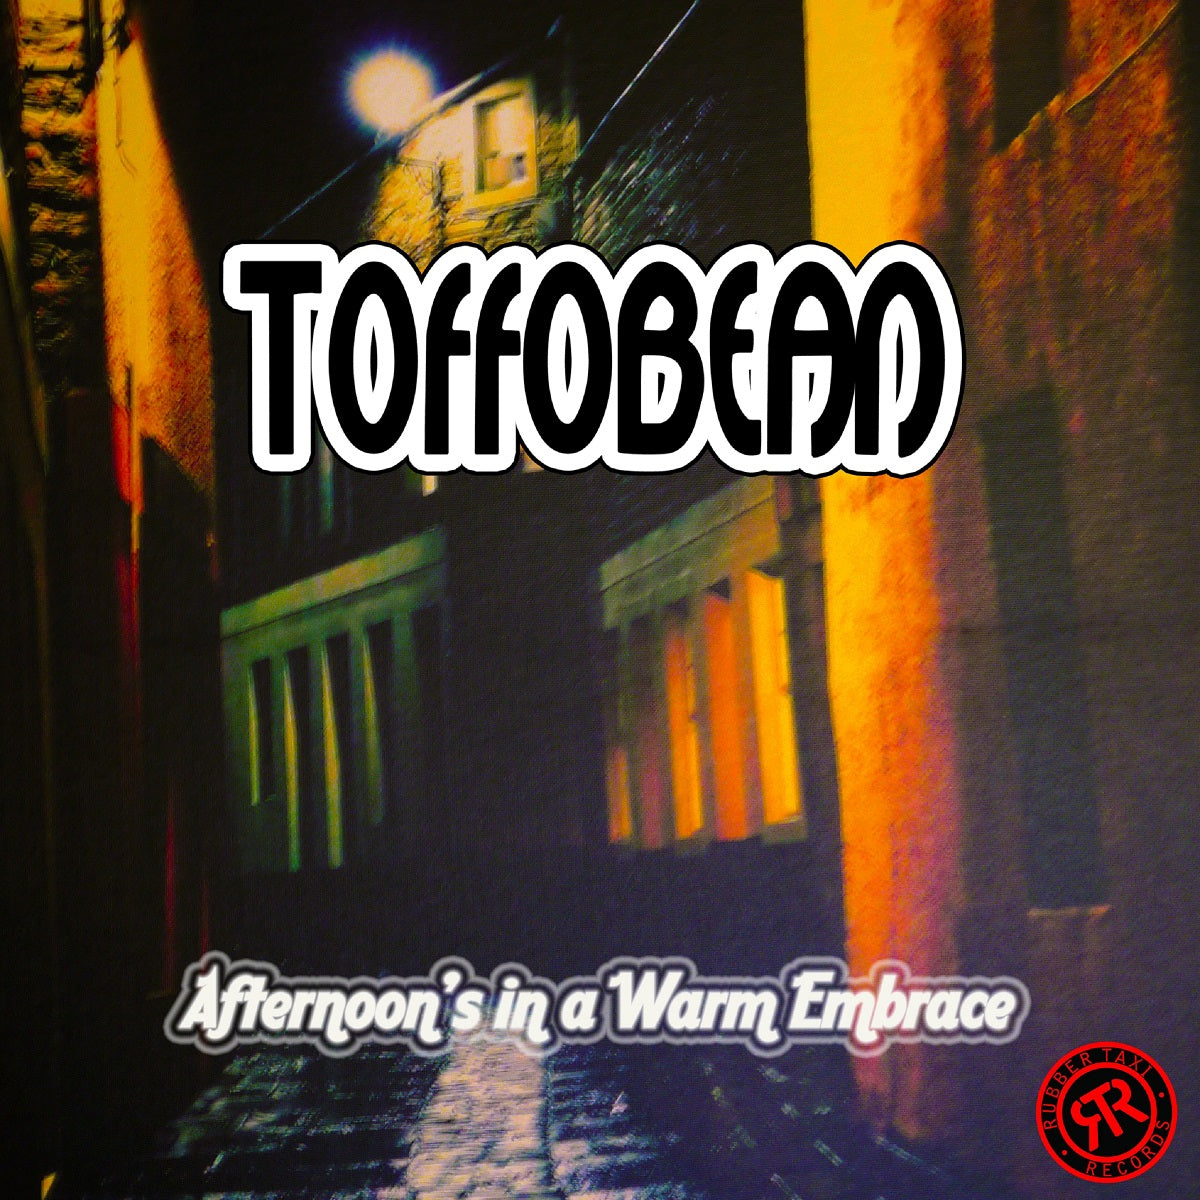 ToffoBean - 'Afternoon's In A Warm Embrace'